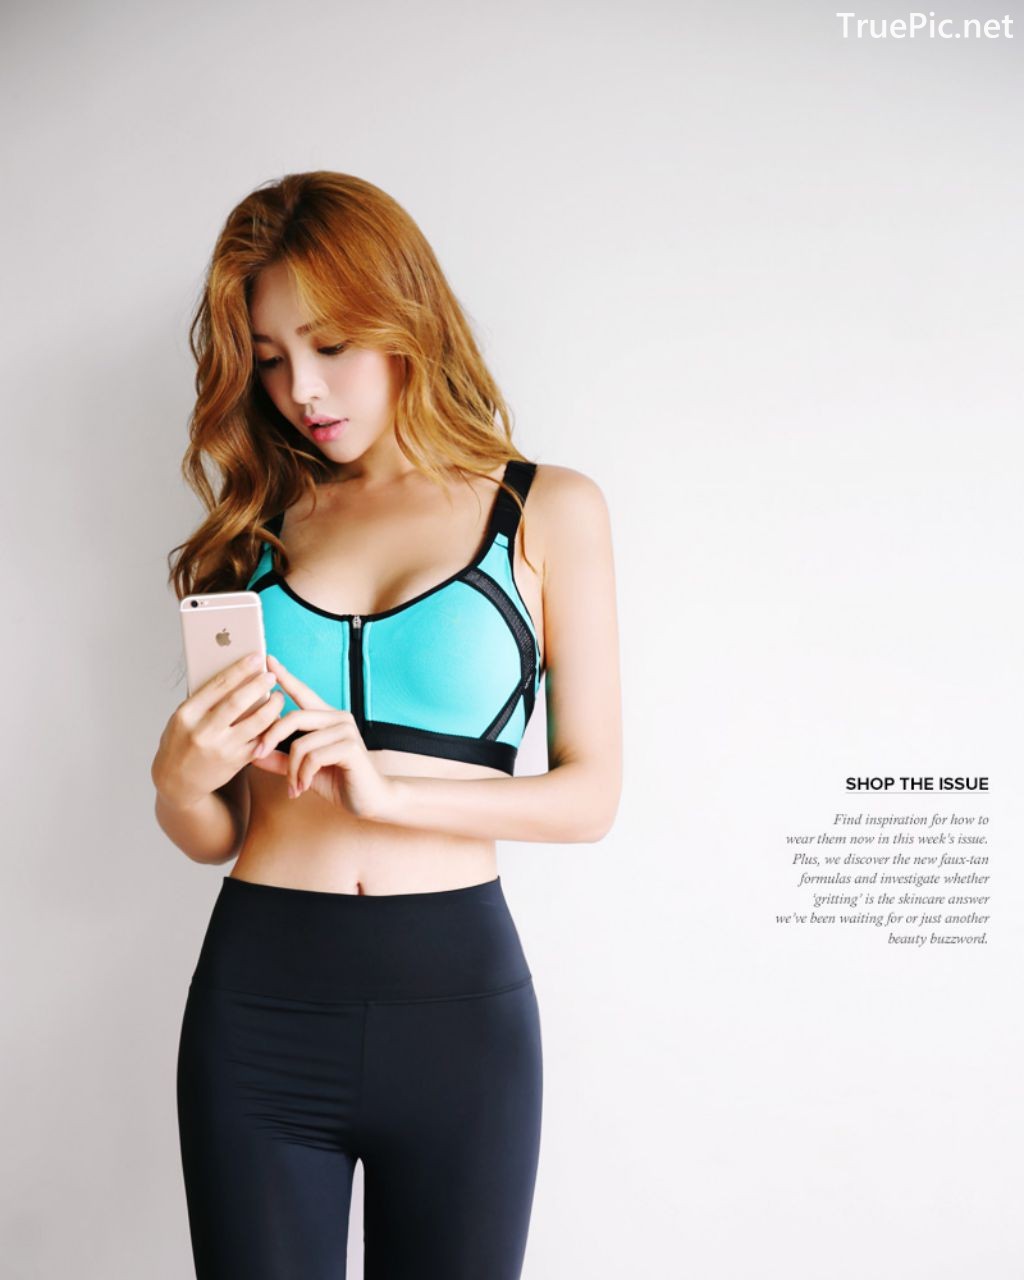 Image-Korean-Fashion-Model-Jin-Hee-Fitness-Set-Photoshoot-Collection-TruePic.net- Picture-69